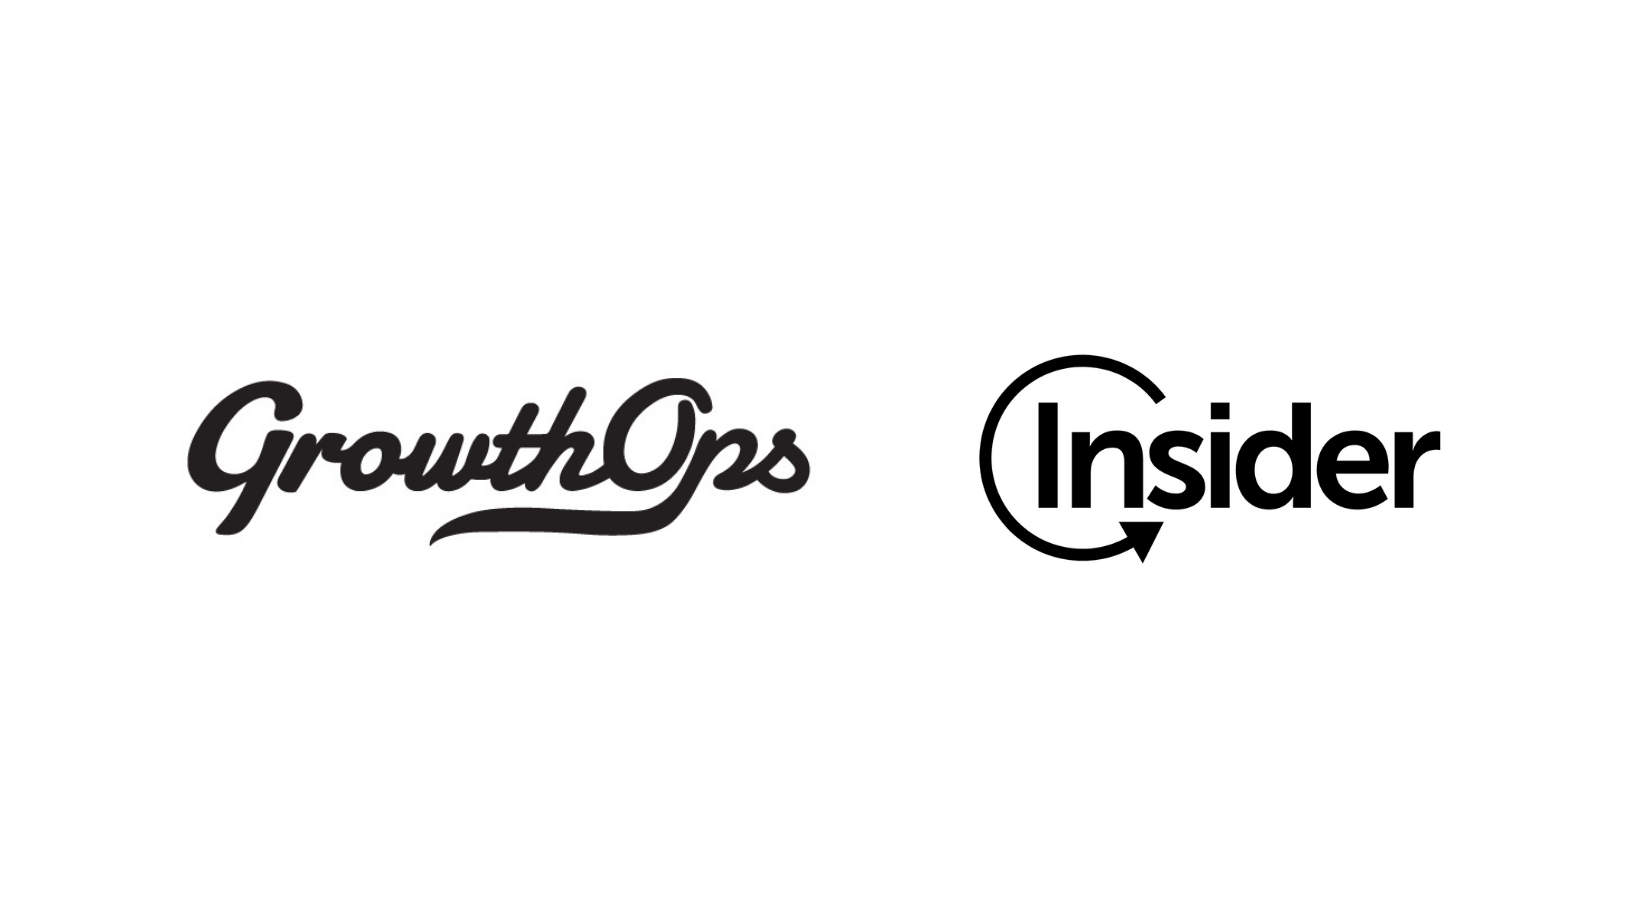 Experience Personalisation now available with Insider - Insider x GrowthOps Partnership Announcement